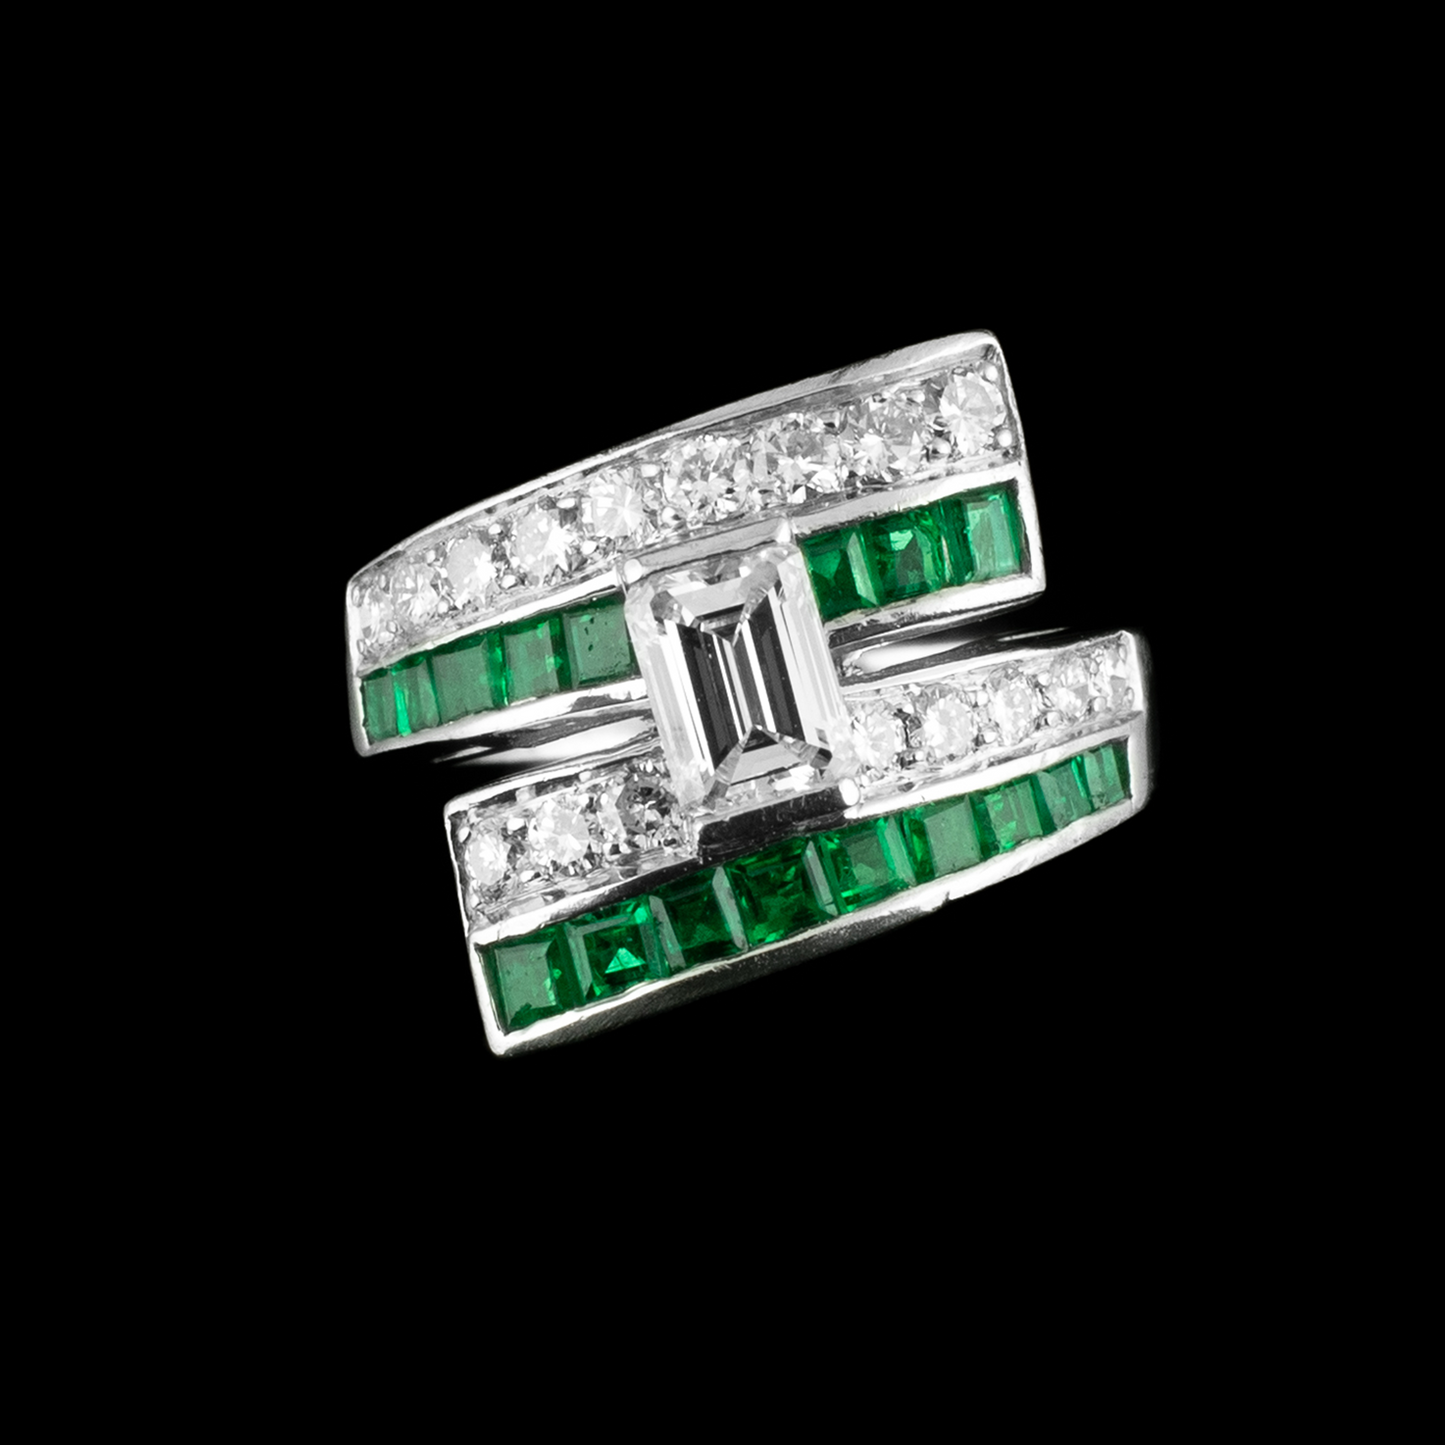 The Crossed Paths Emerald Ring